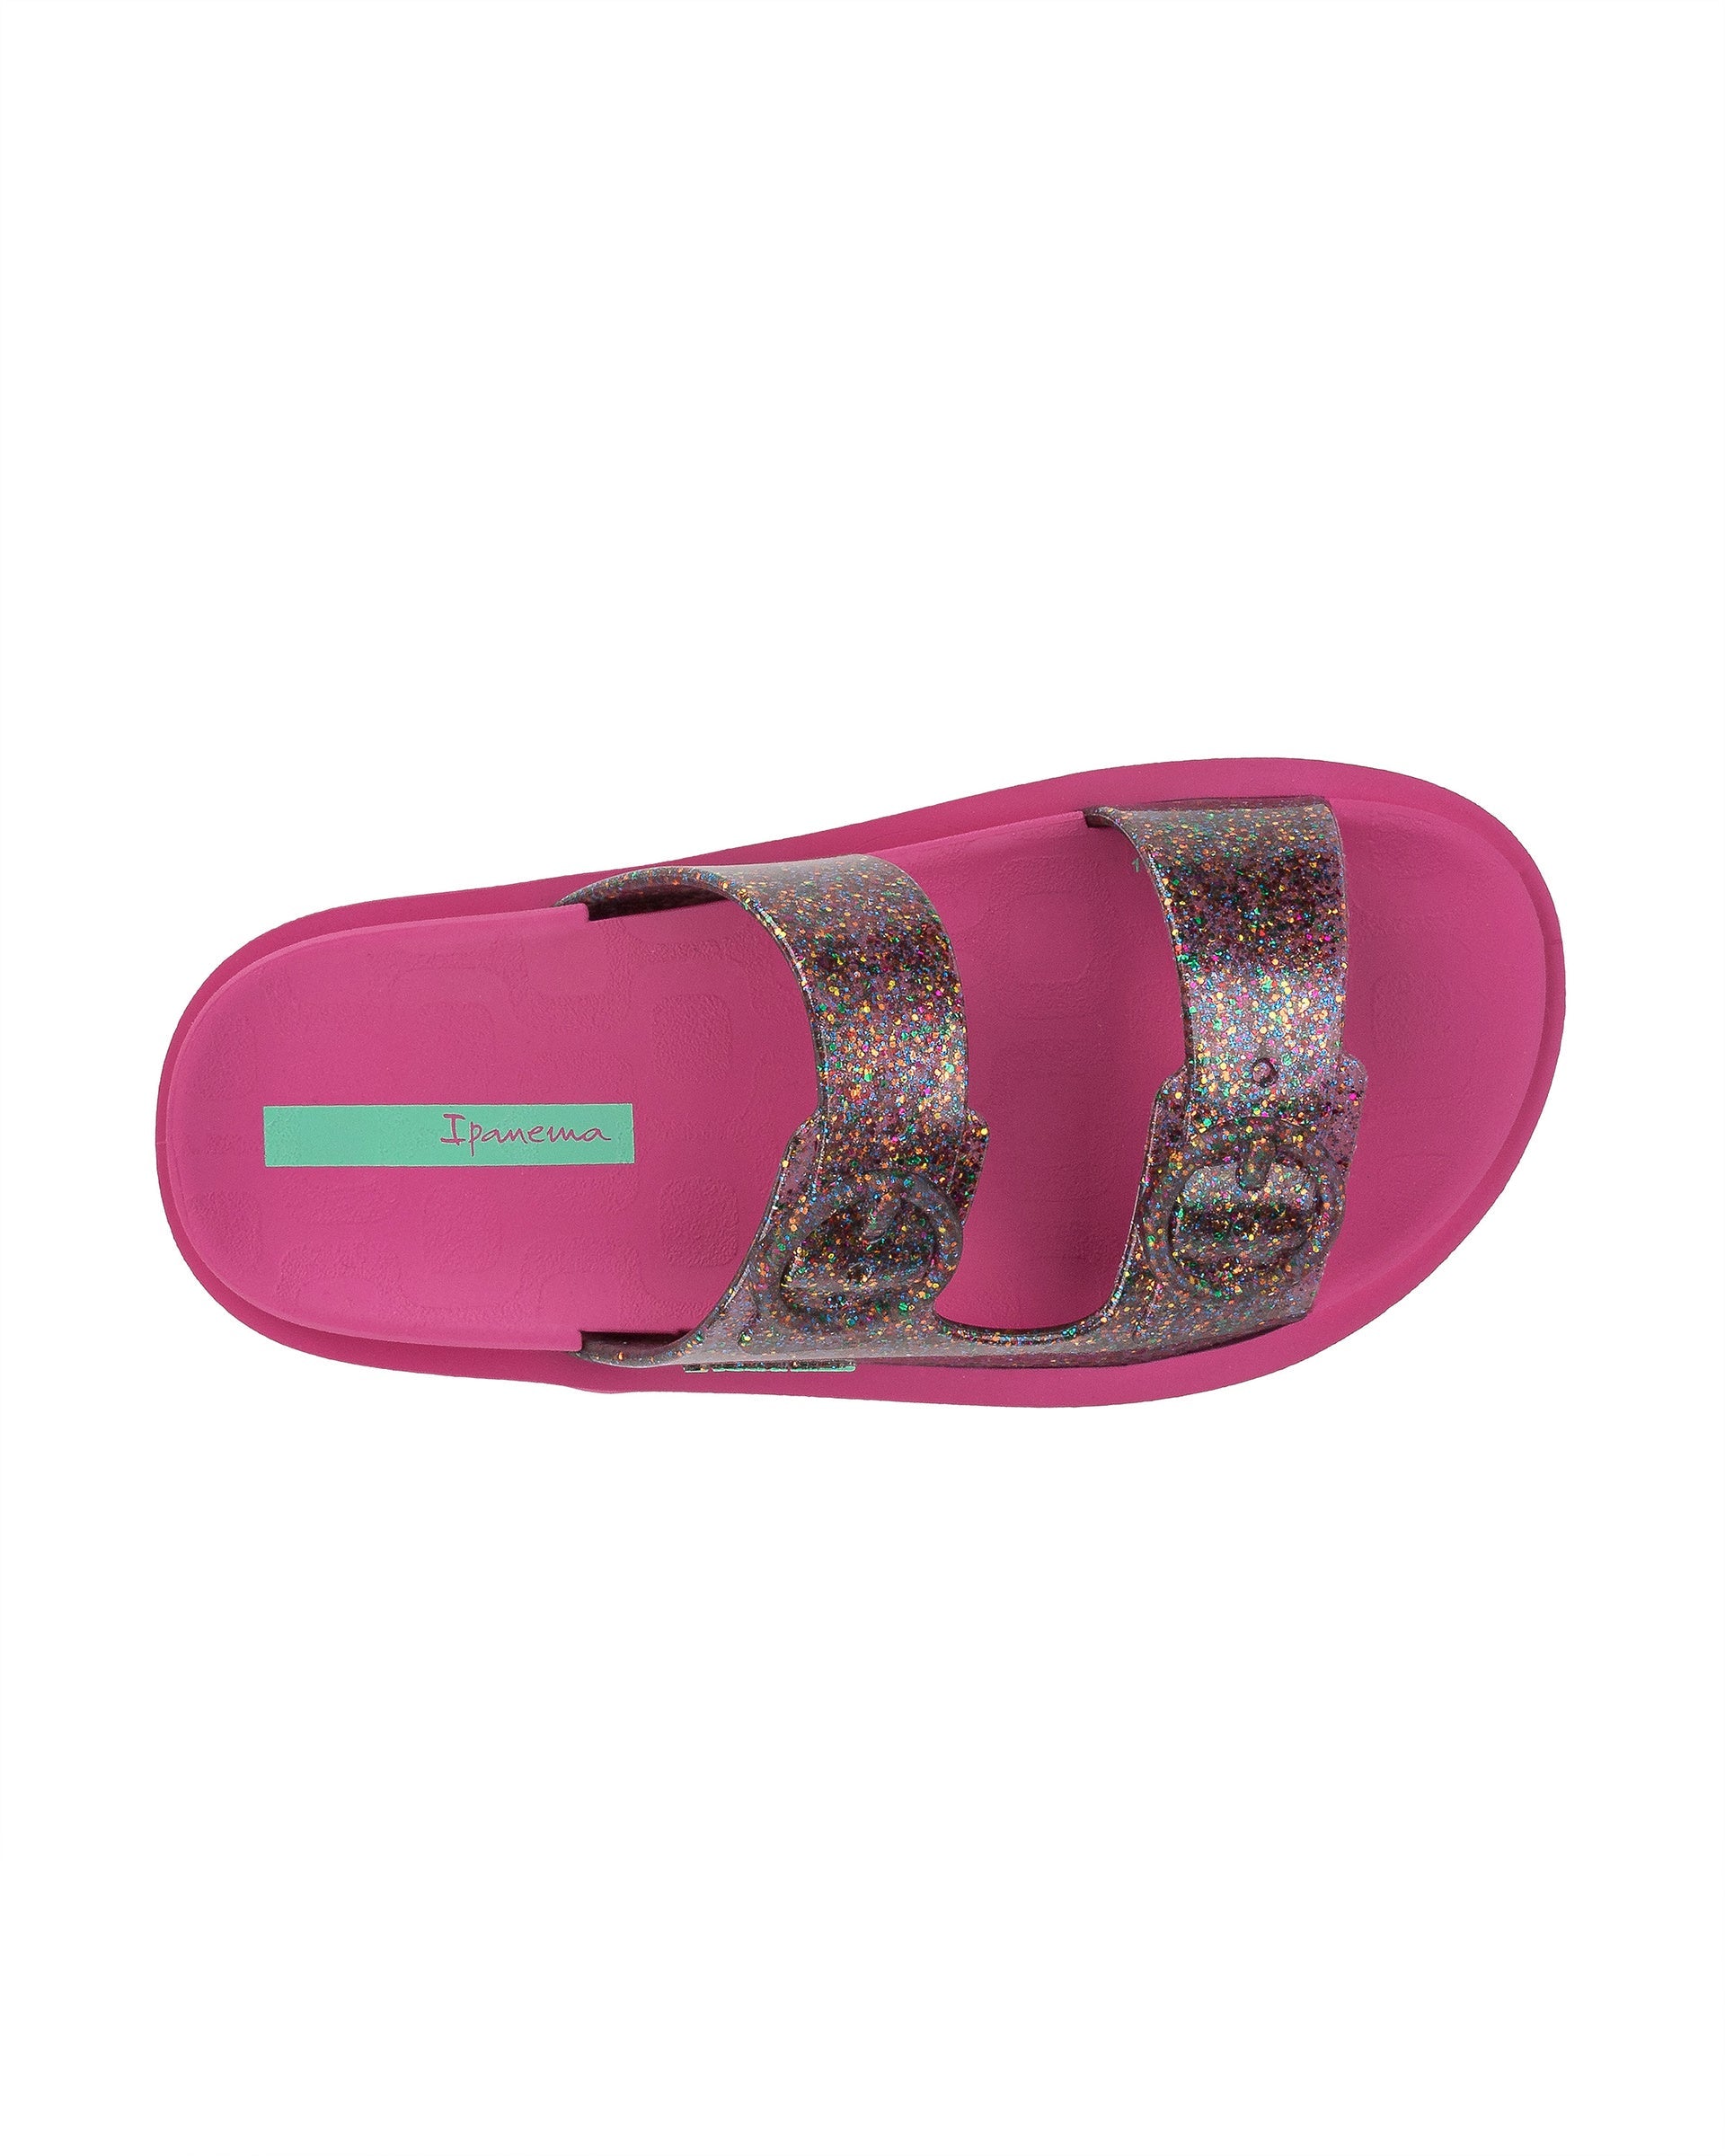 Top view of a pink Ipanema Follow kids slide with a multicolor glitter upper.